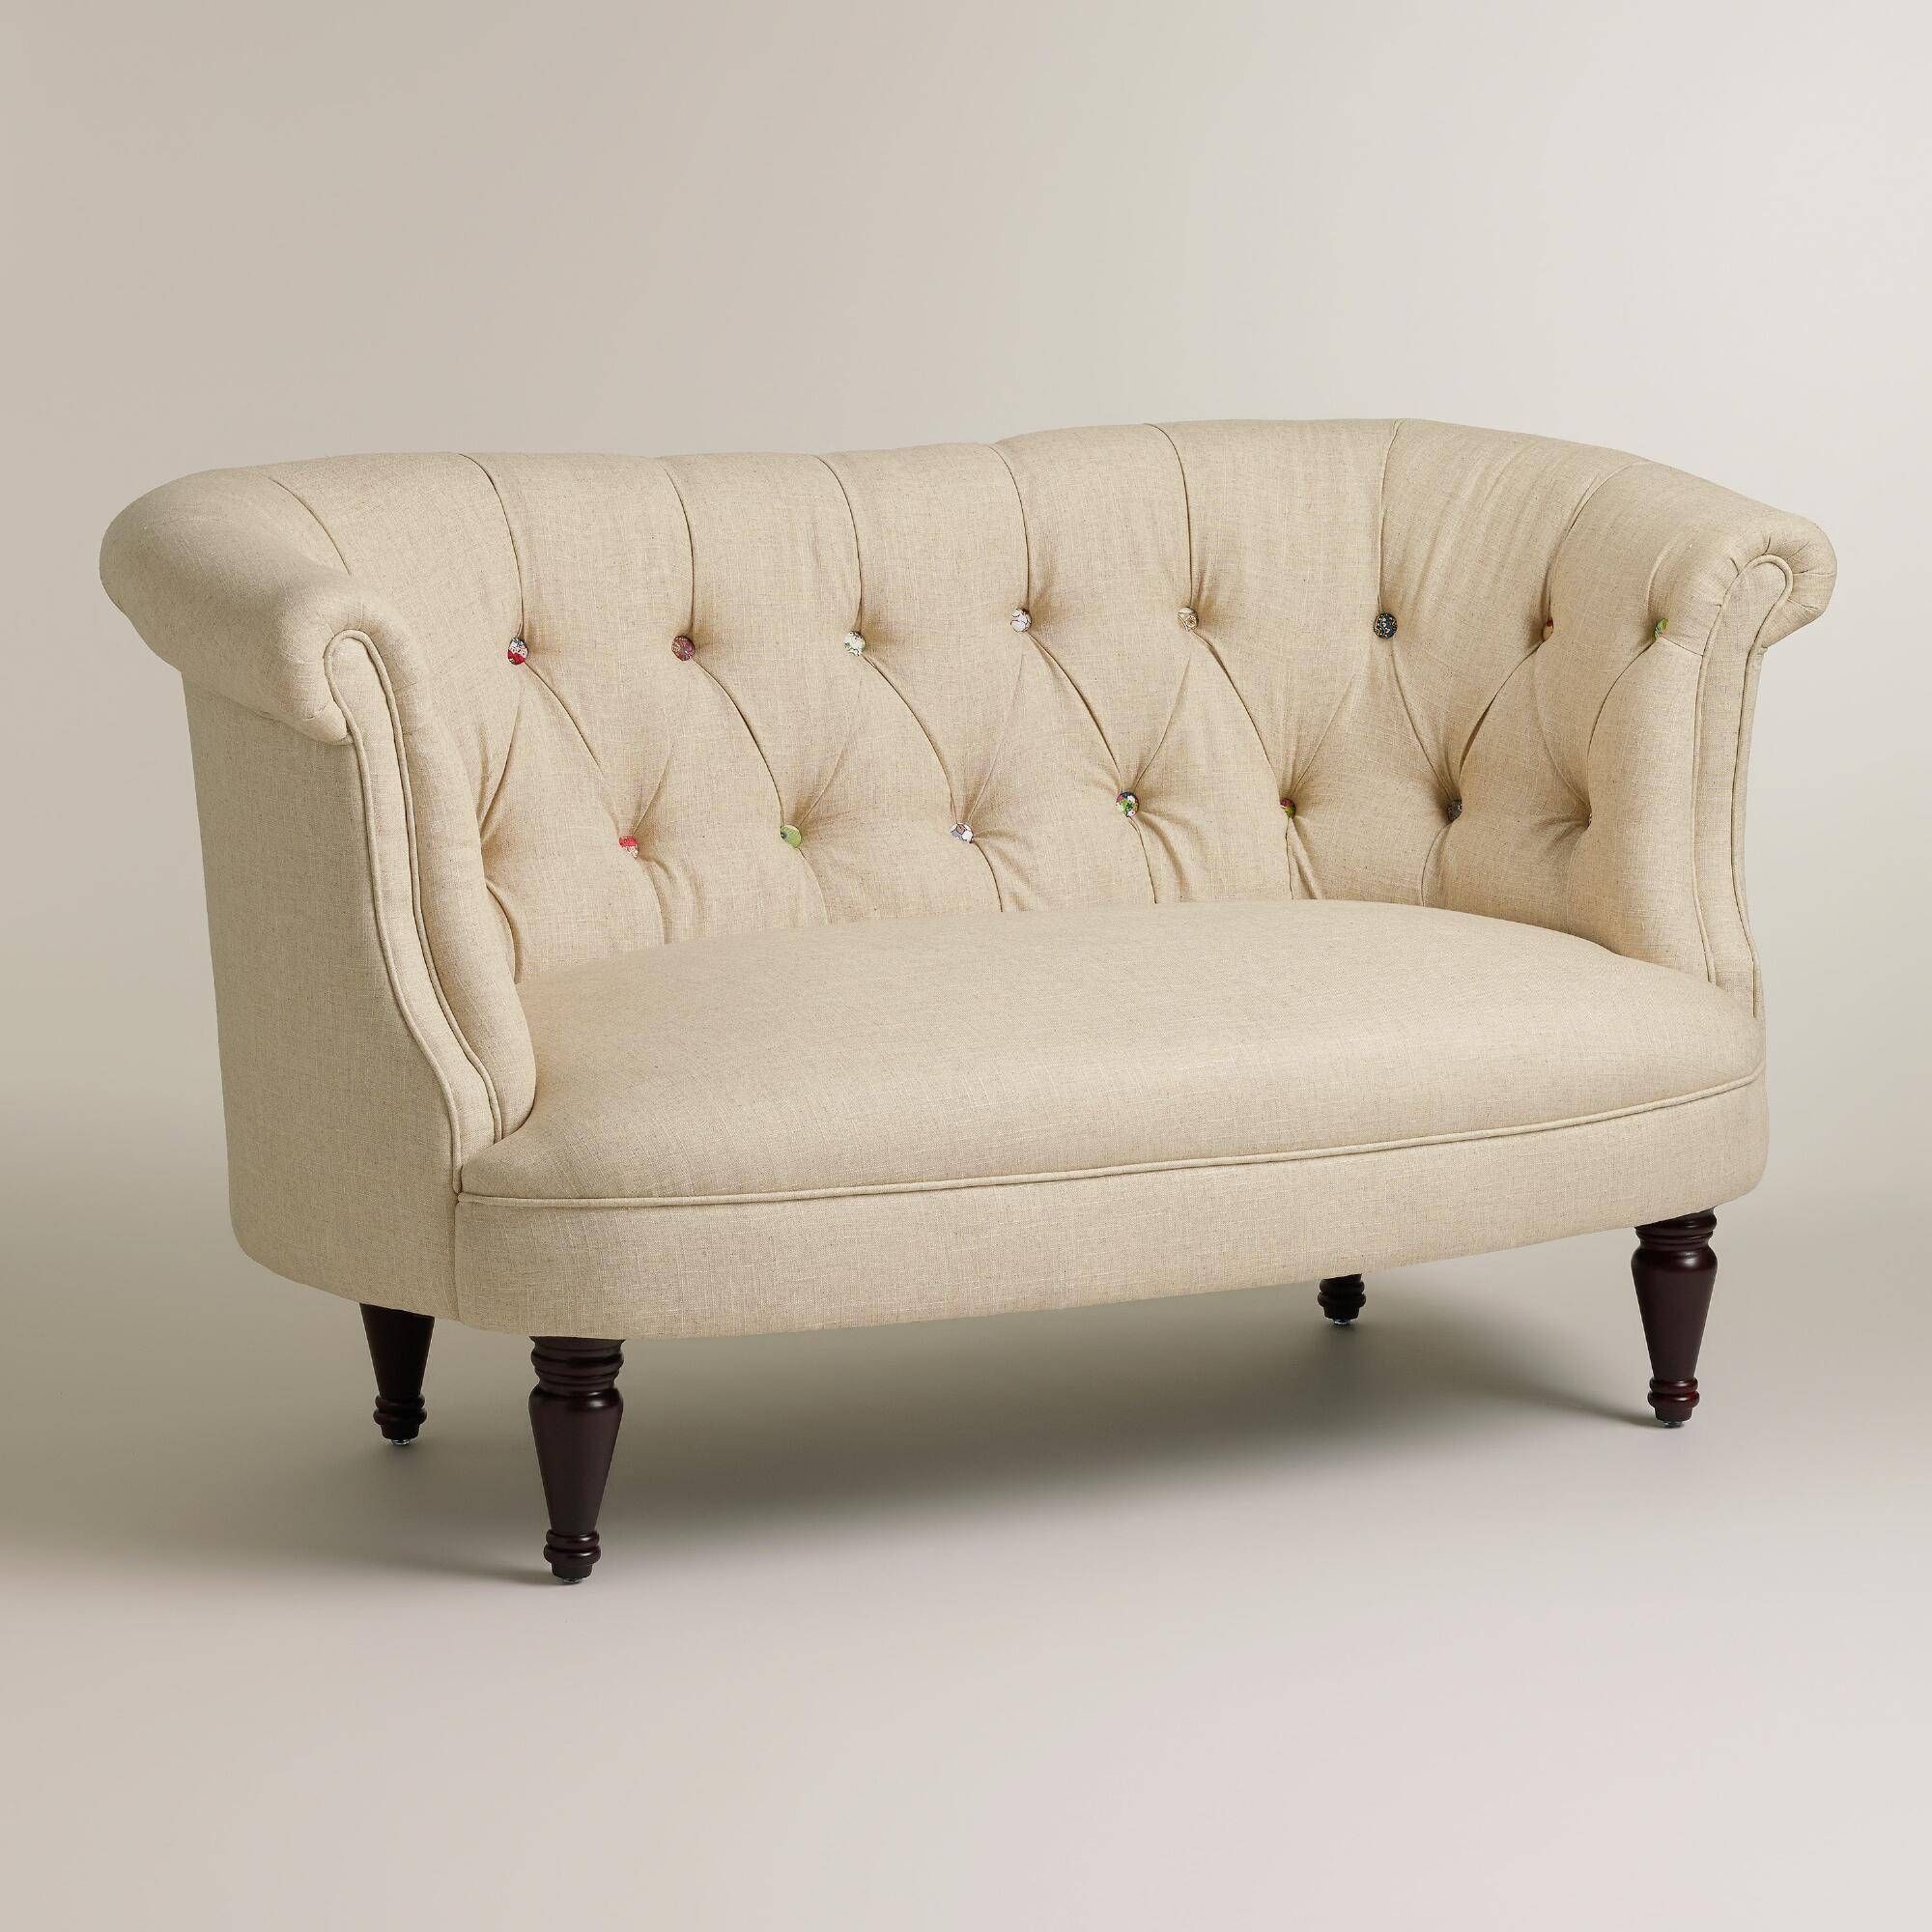 Sofa: Cool Couches For Provides A Warm To Comfortable Feel And Low With Regard To Affordable Tufted Sofa (Photo 14 of 30)